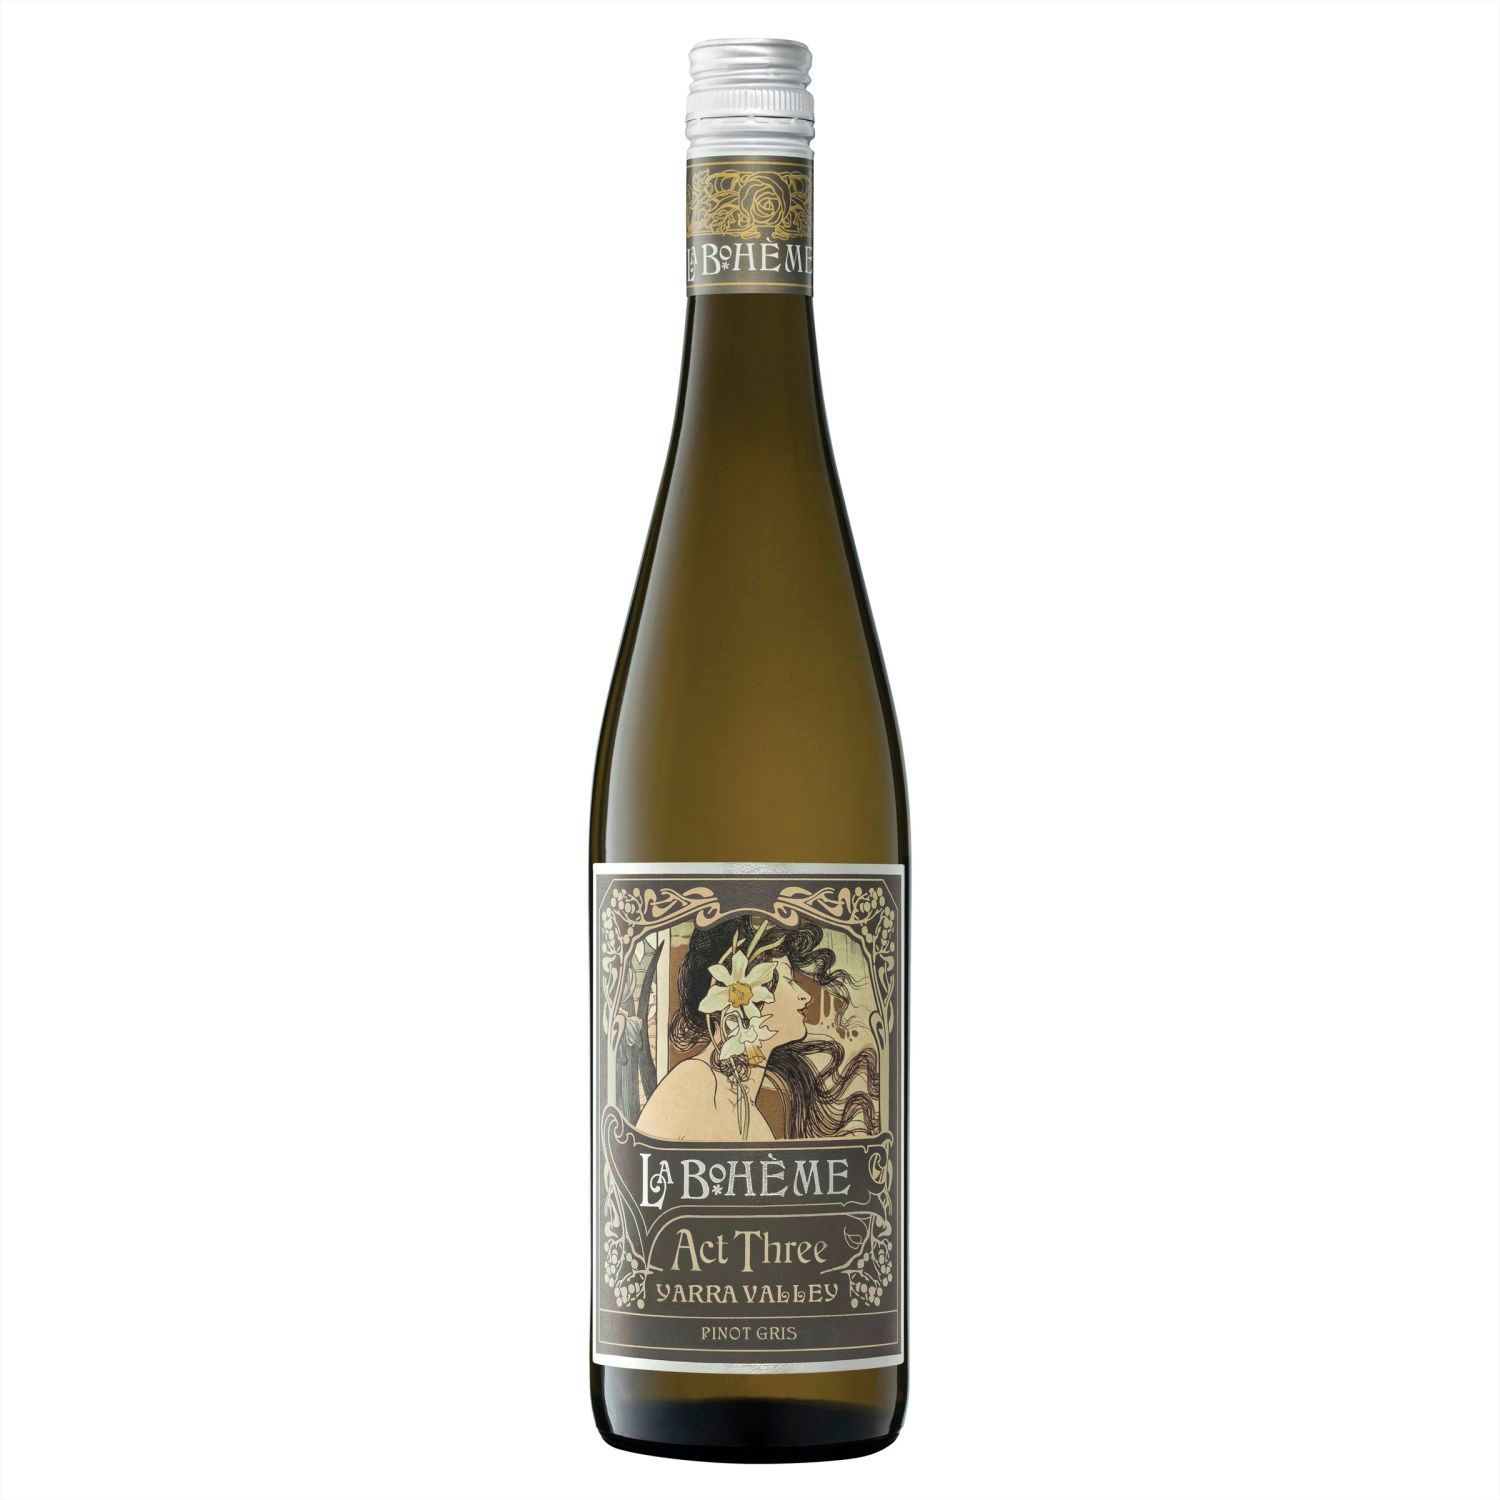 Serious Pinot Gris with a hint of other aromatic varieties - lovely harmony!<br /> <br />Alcohol Volume: 13.00%<br /><br />Pack Format: Bottle<br /><br />Standard Drinks: 7.7</br /><br />Pack Type: Bottle<br /><br />Country of Origin: Australia<br /><br />Region: Yarra Valley<br /><br />Vintage: Vintages Vary<br />